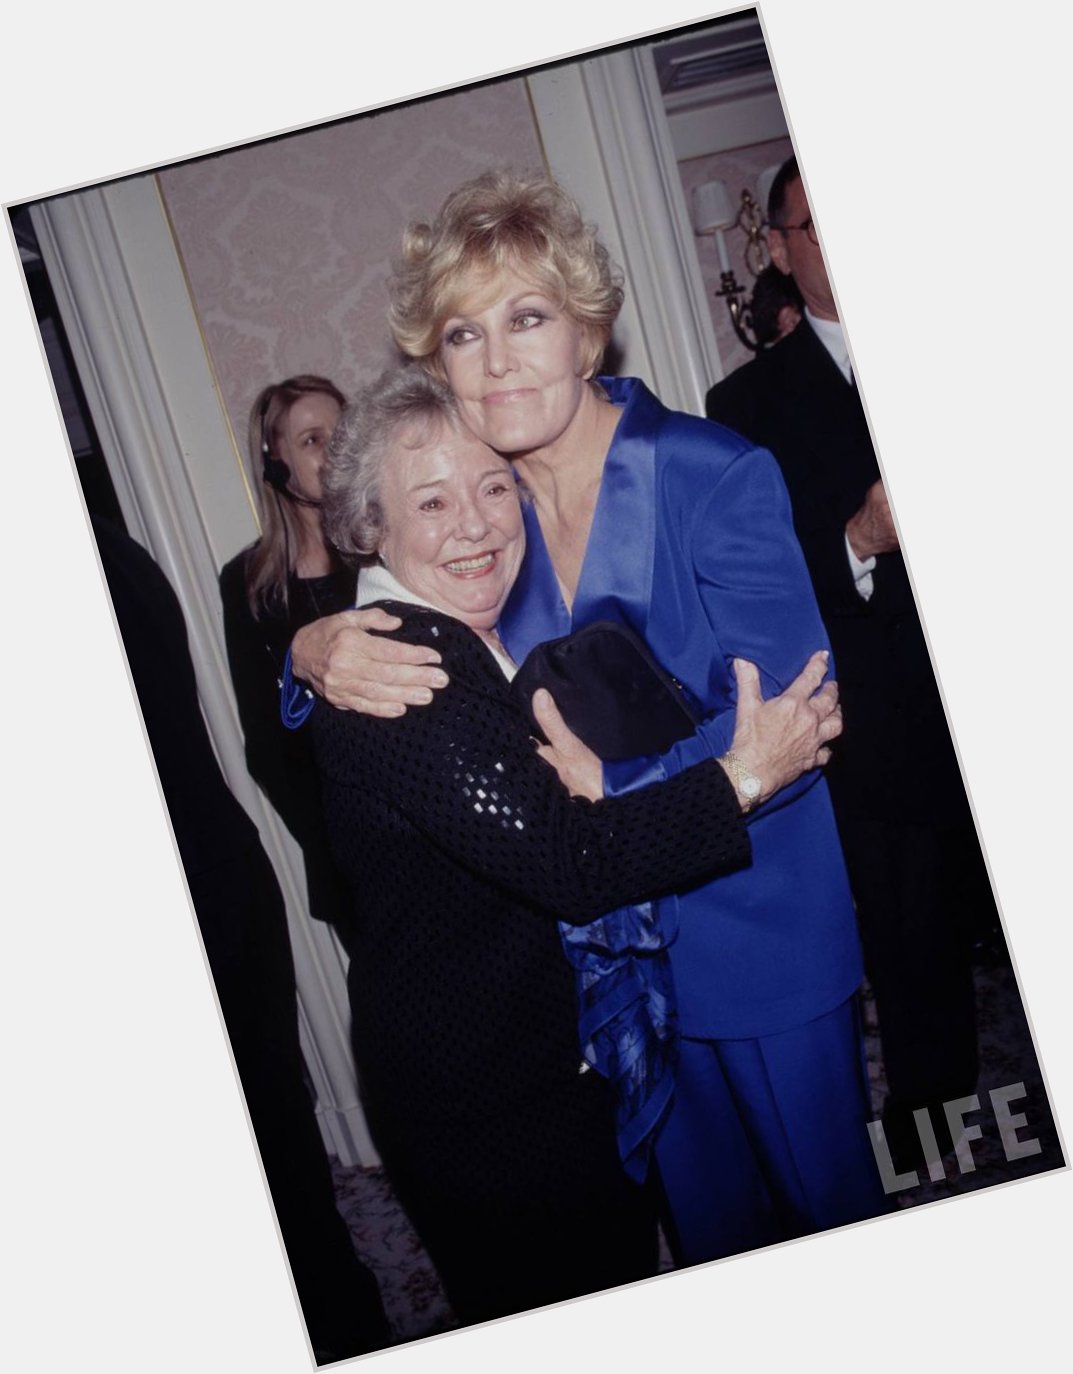 Happy birthday Kim Novak.
No date or credits with this photo, but my guess is that\s Patricia Hitchcock with KN 